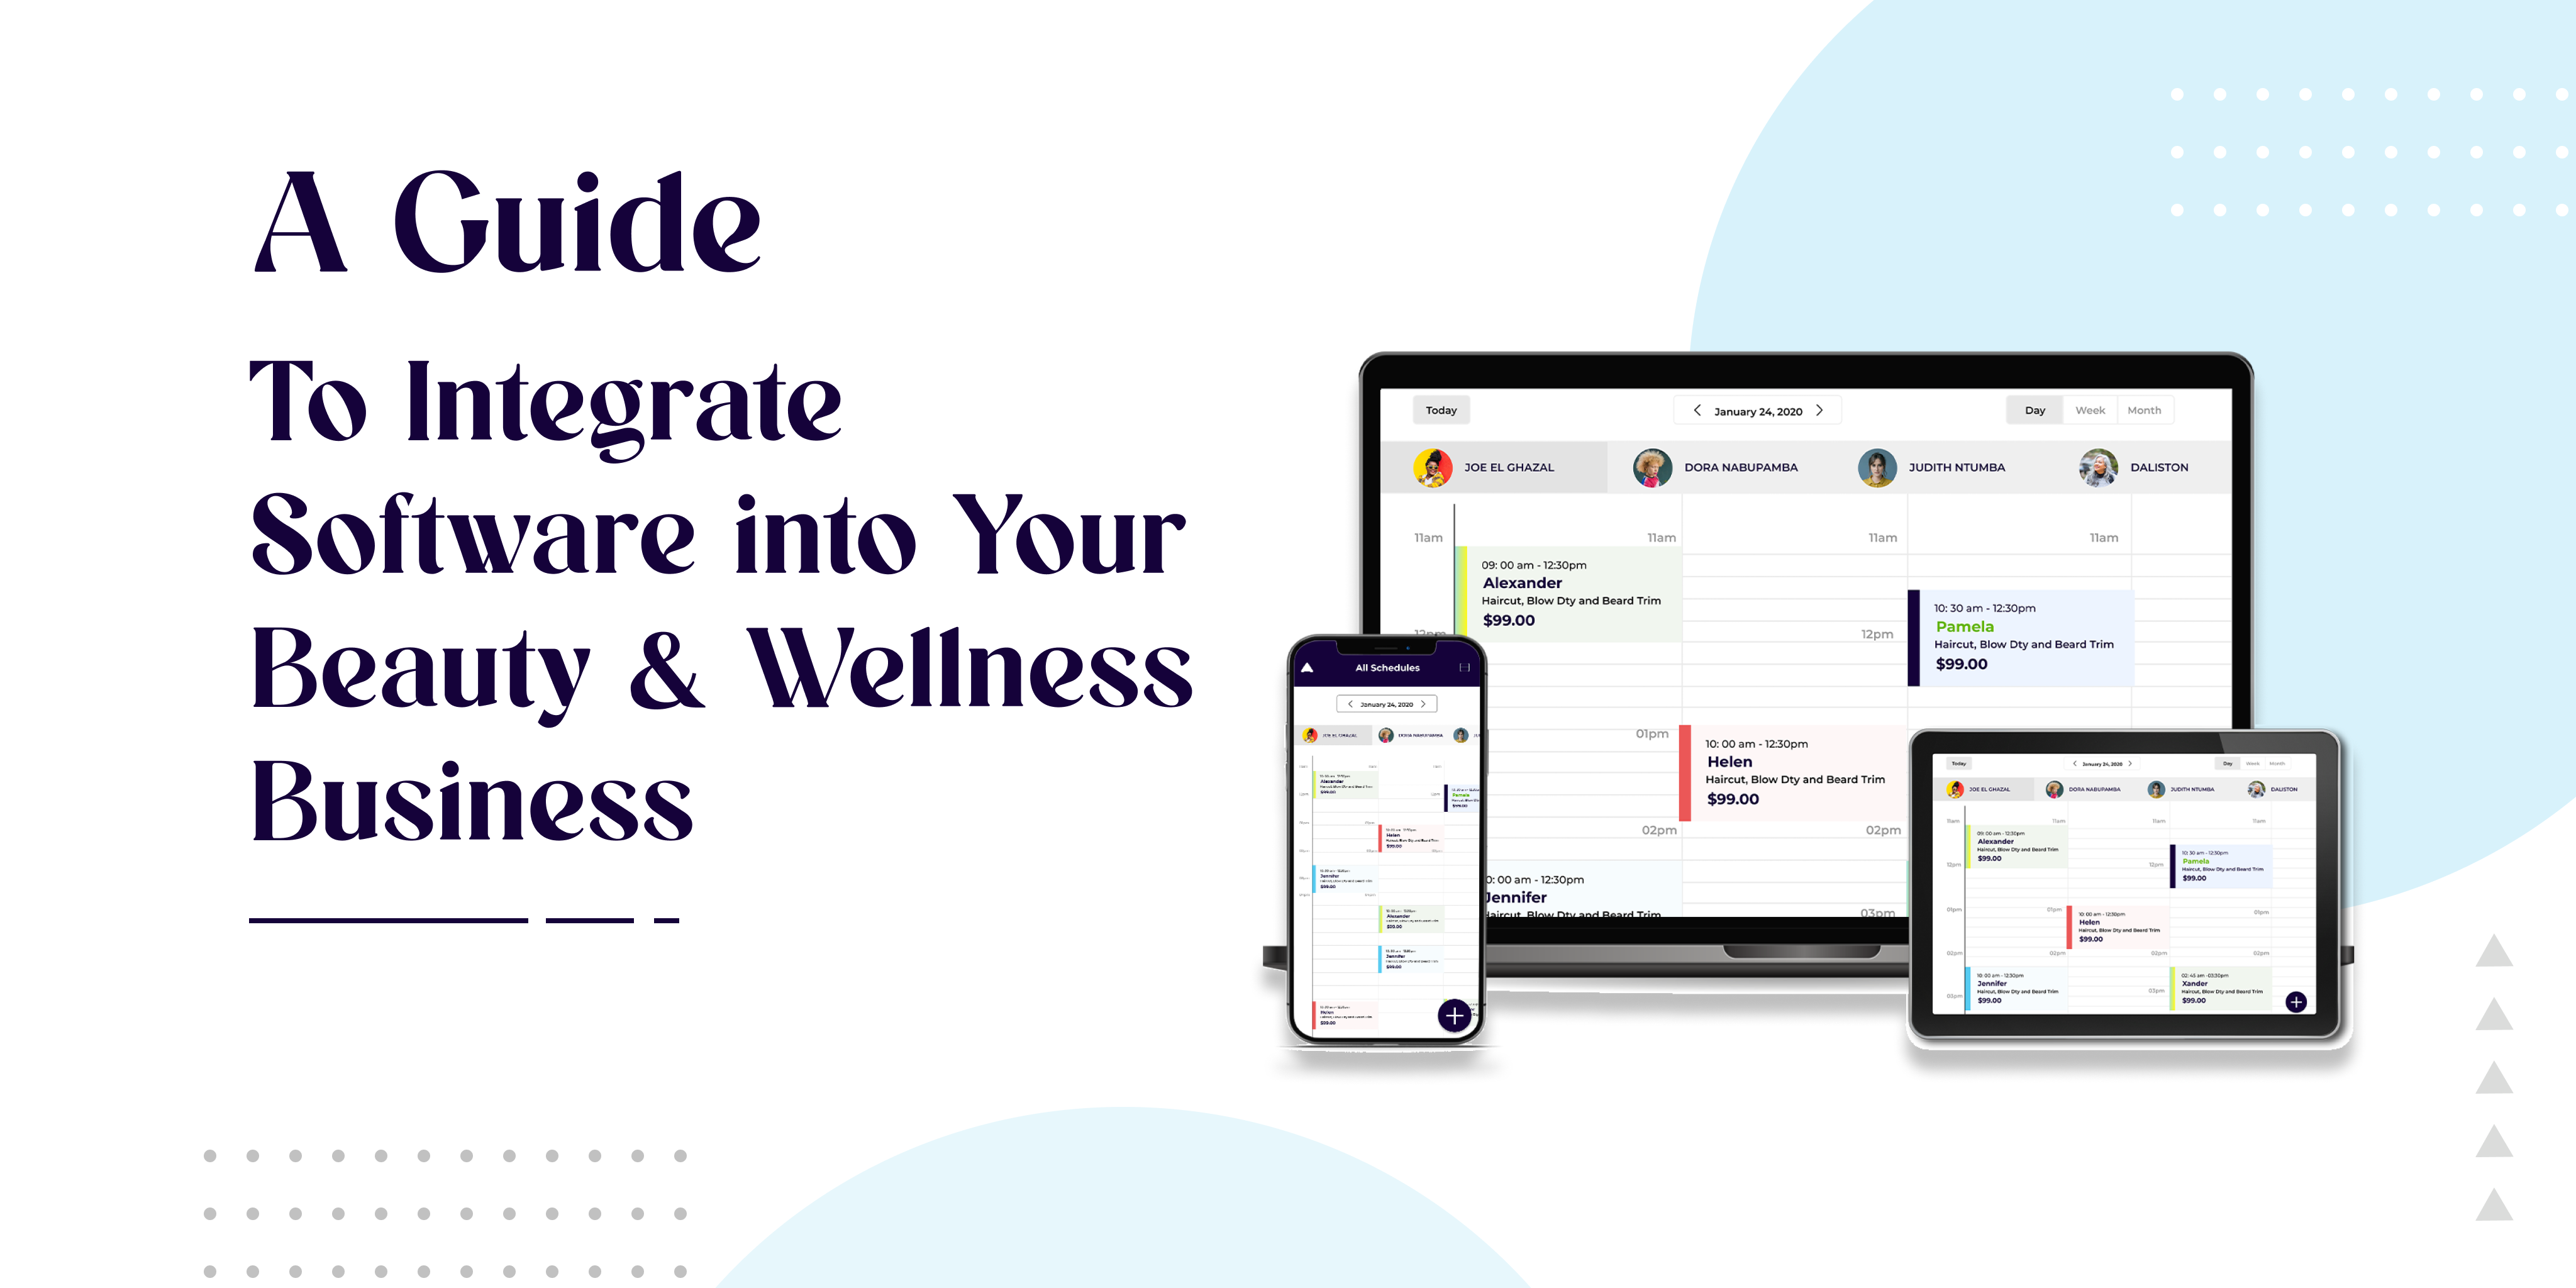 A Guide to Integrate Software into Your Beauty & Wellness Business